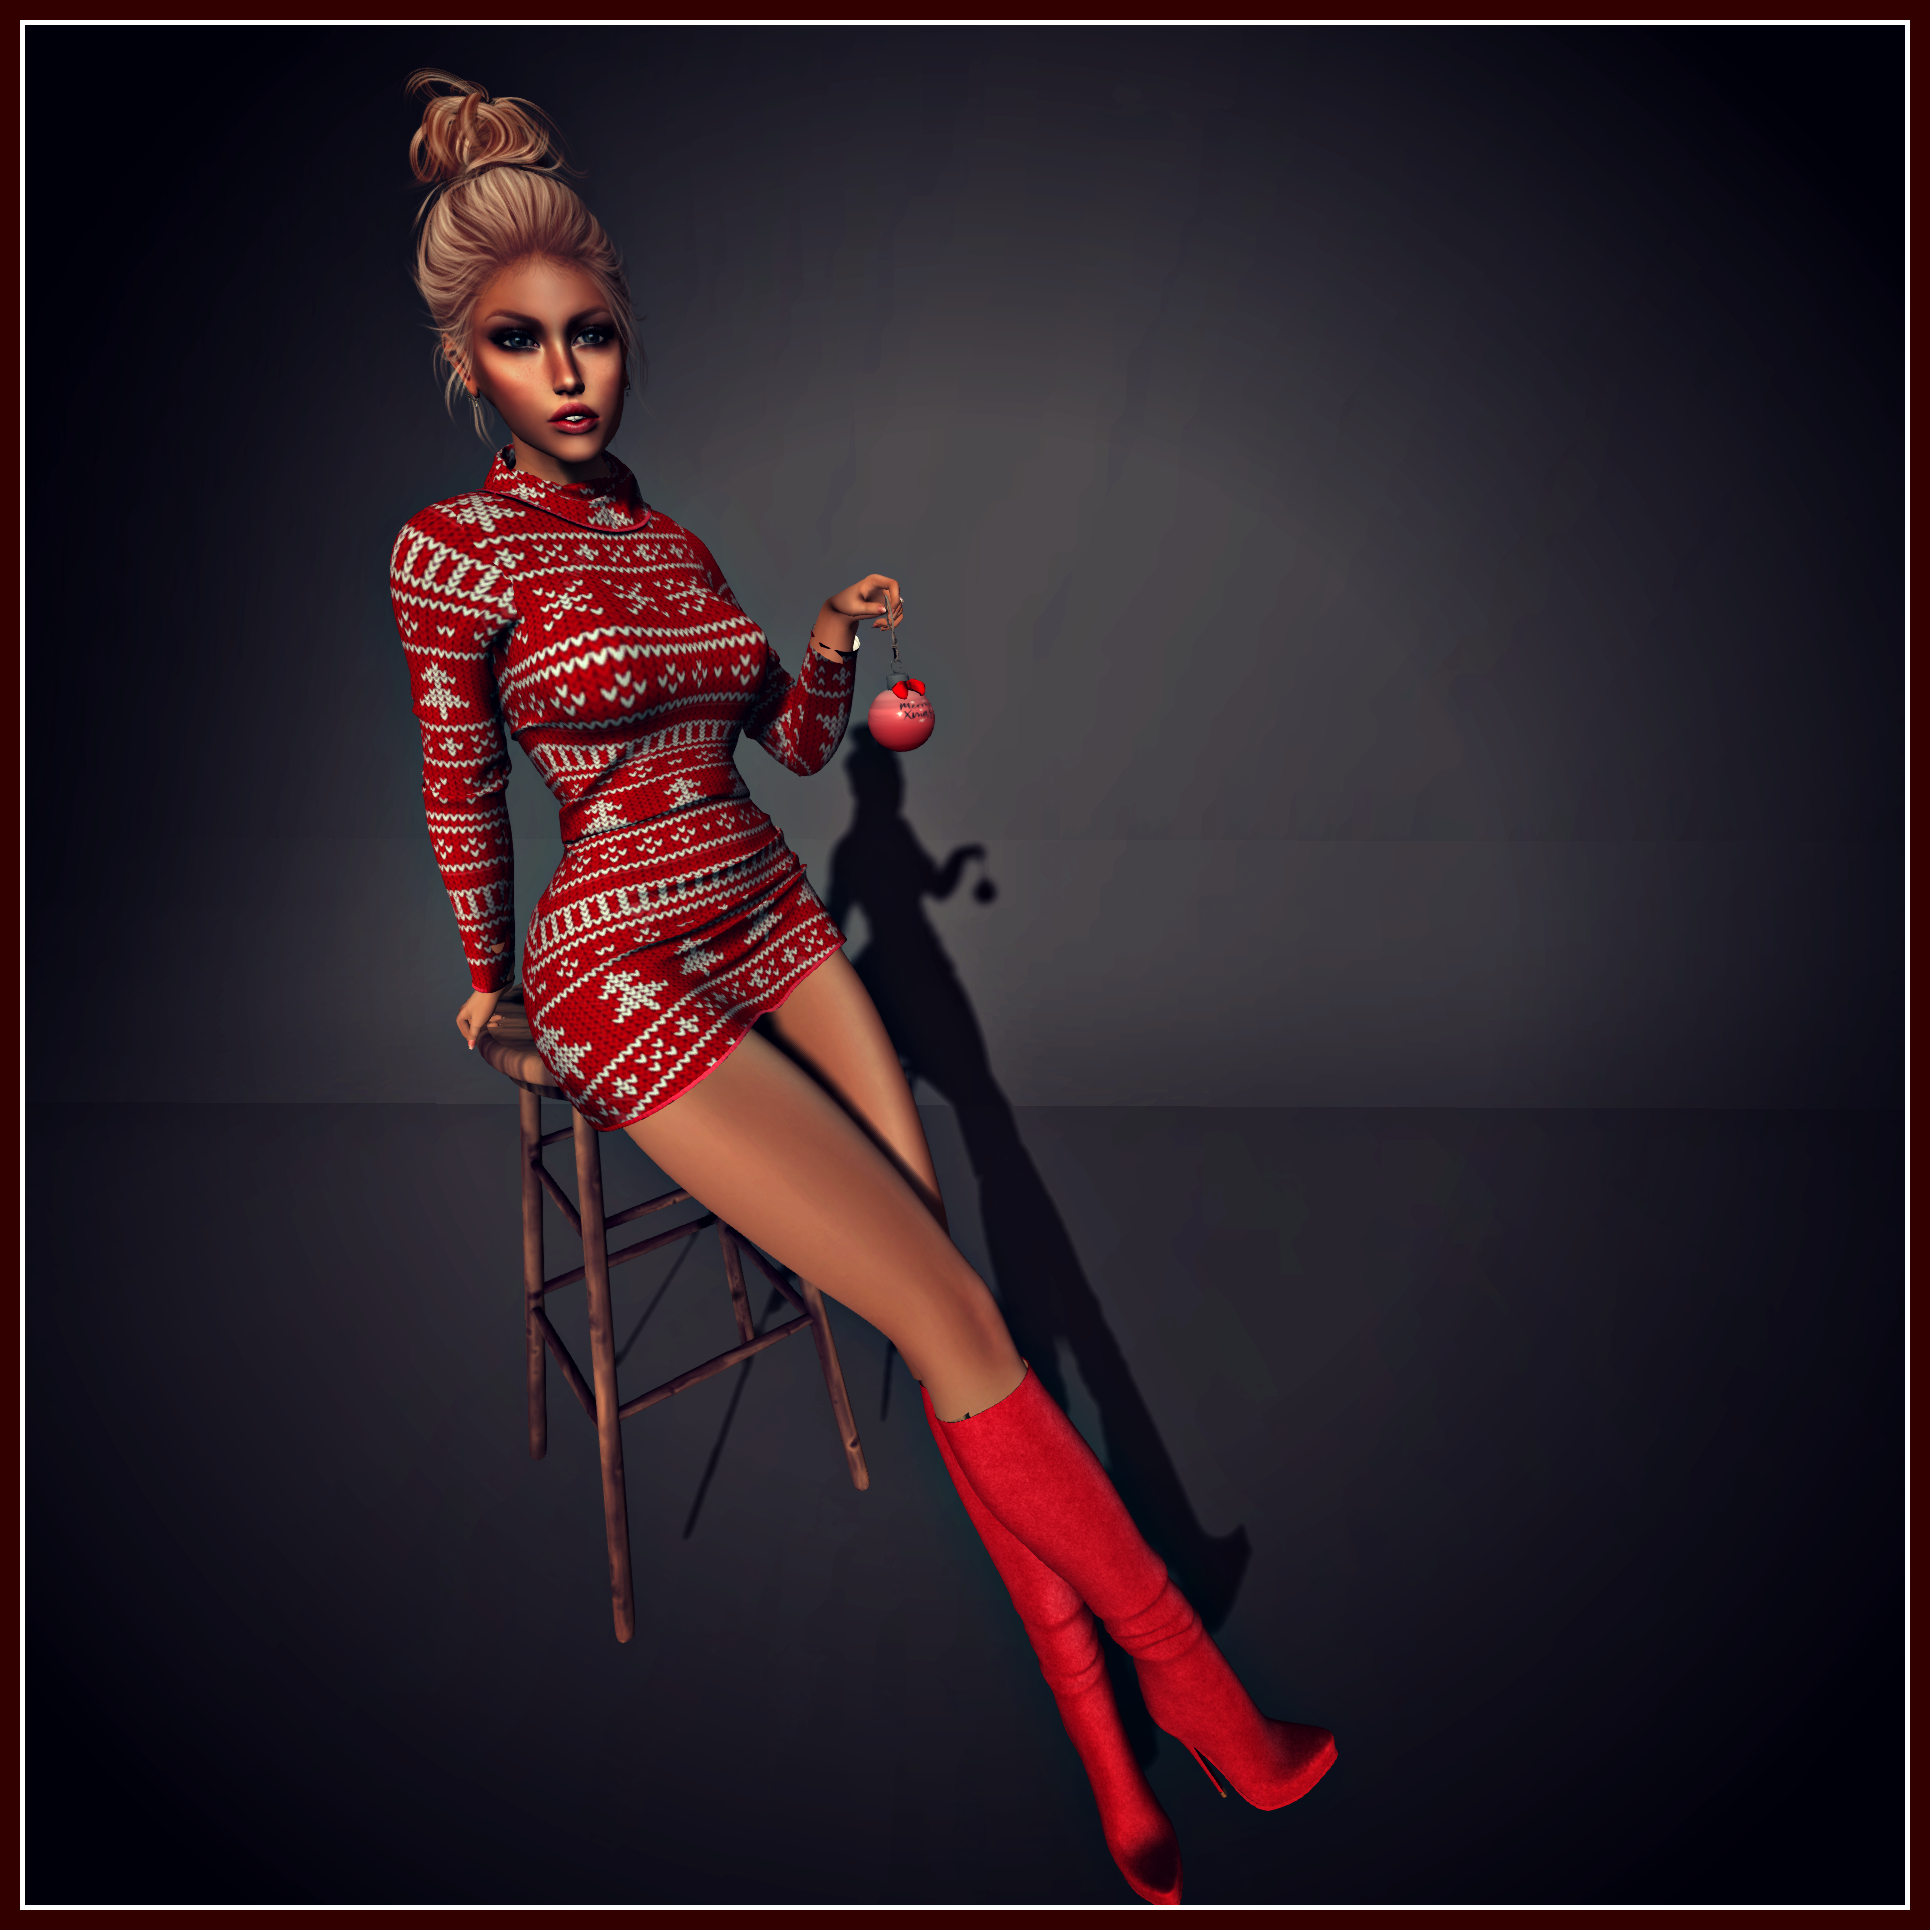 FREE mesh body - $10L fatpacl dress, $10L fatpack boots, poppycock prop stool